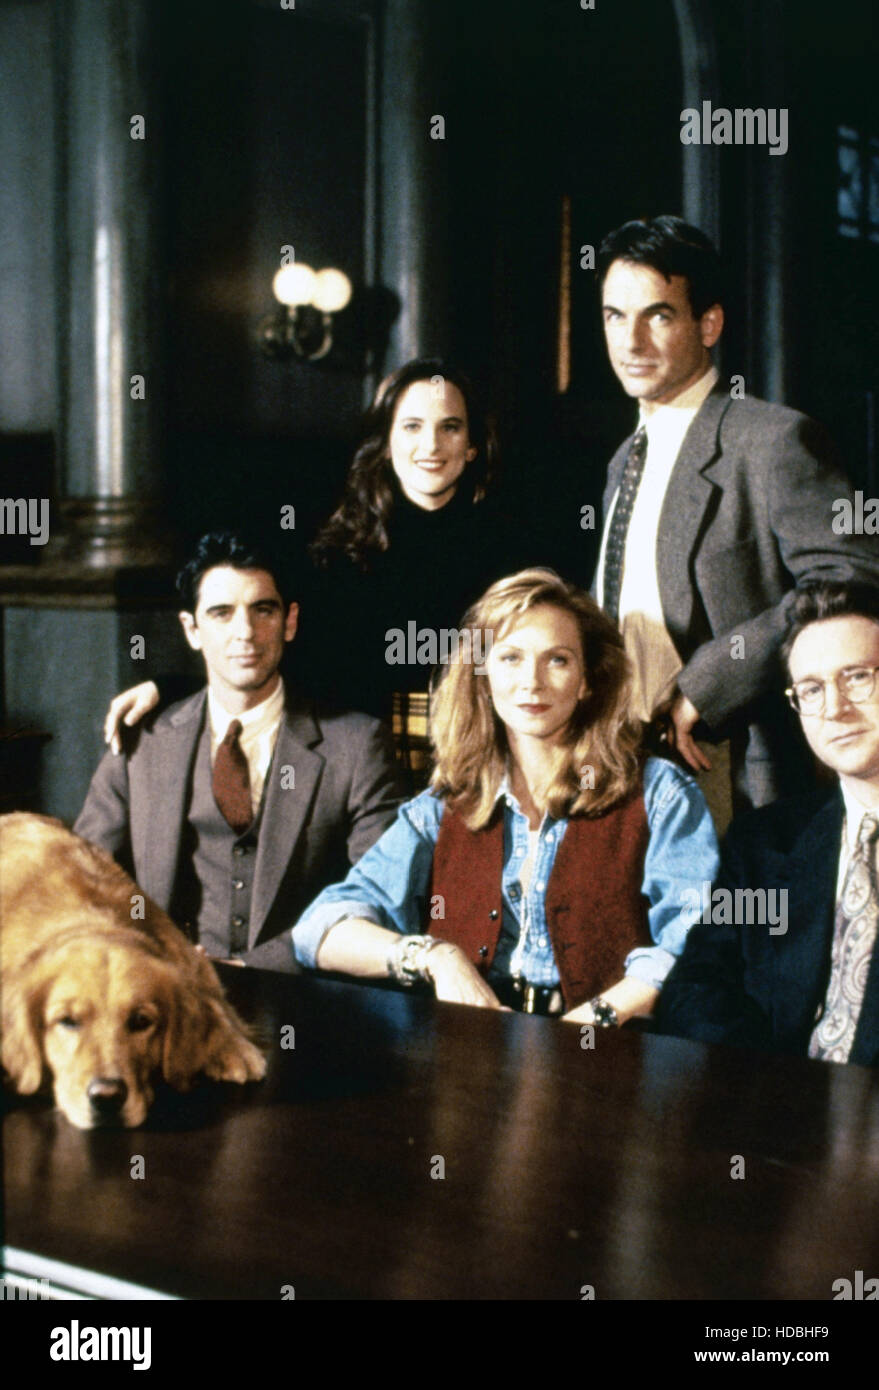 REASONABLE DOUBTS, front from left: William Converse-Roberts, Nancy  Everhard, rear from left: Marlee Matlin, Mark Harmon Stock Photo - Alamy